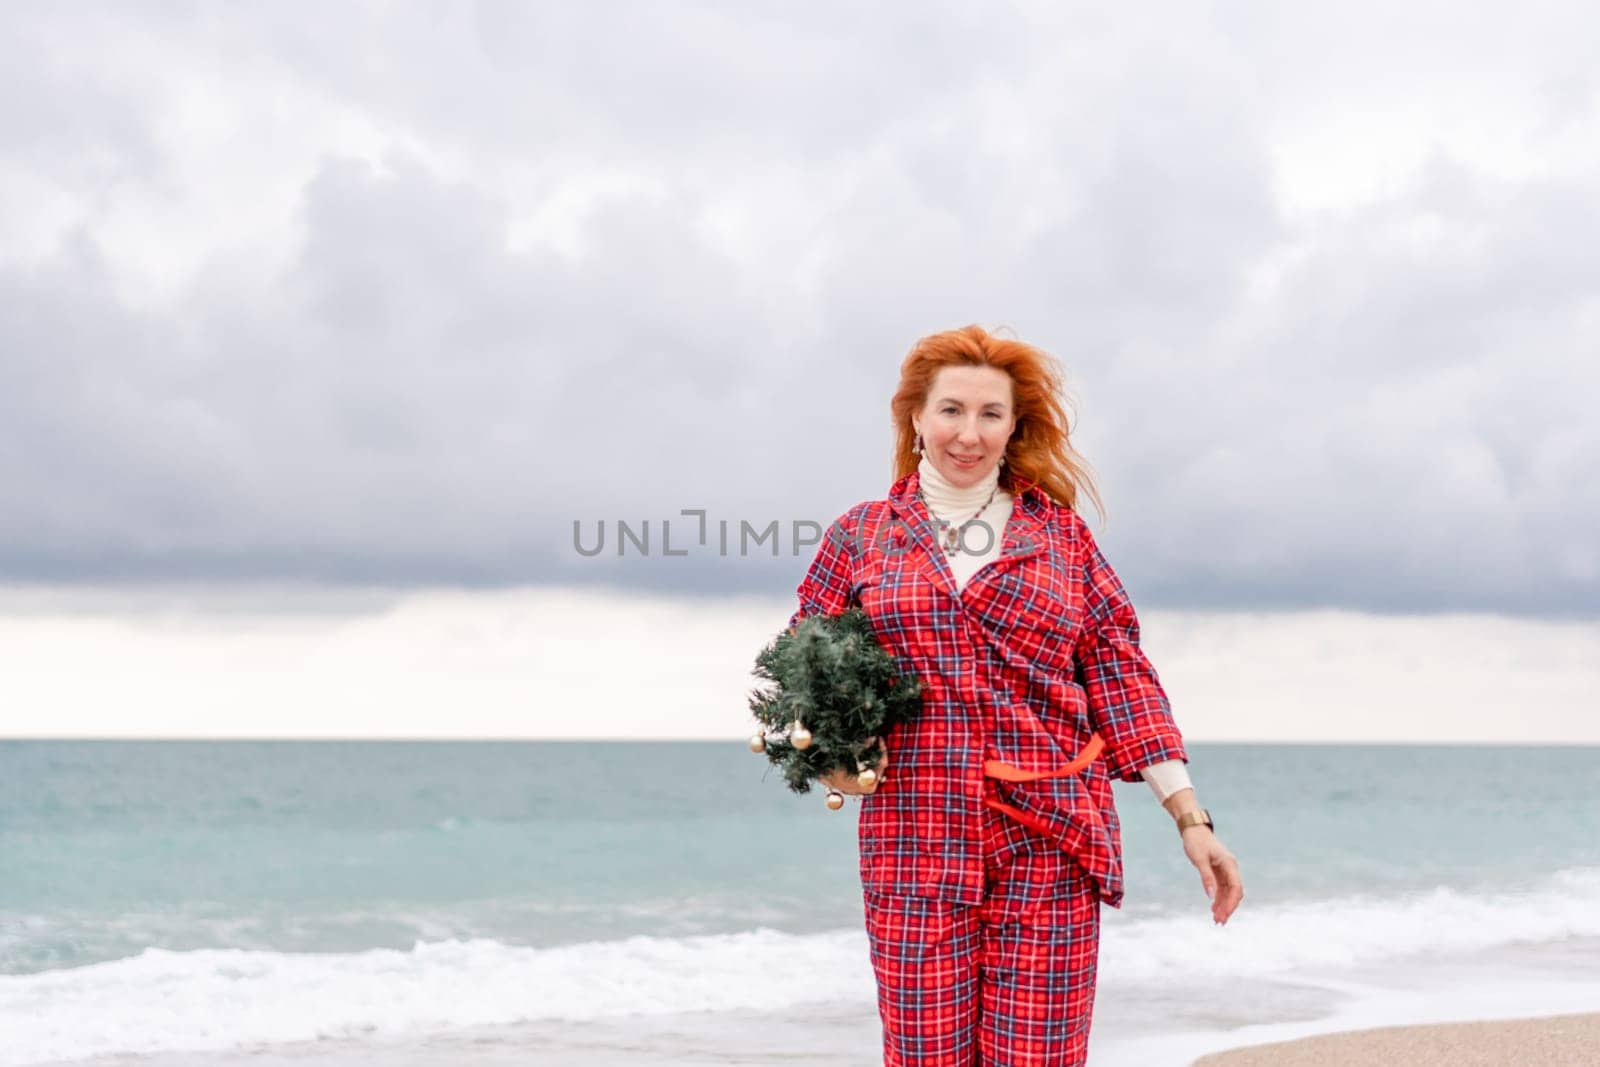 Sea Lady in plaid shirt with a christmas tree in her hands enjoys beach. Coastal area. Christmas, New Year holidays concep by Matiunina